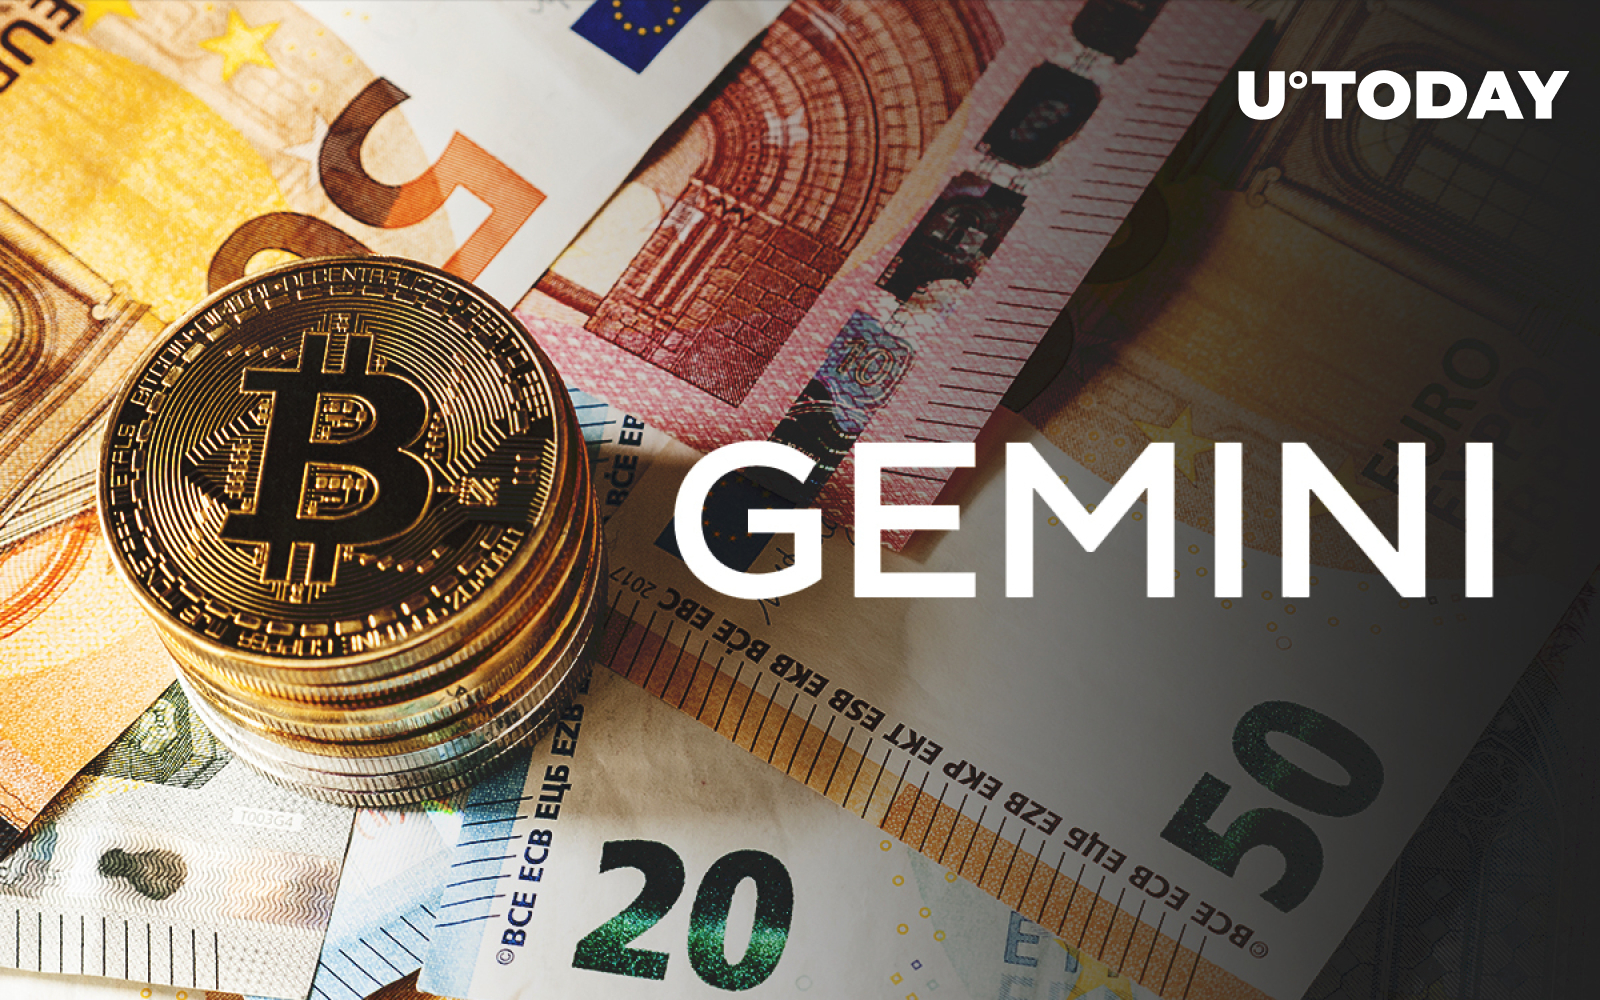 what cryptos can you buy on gemini